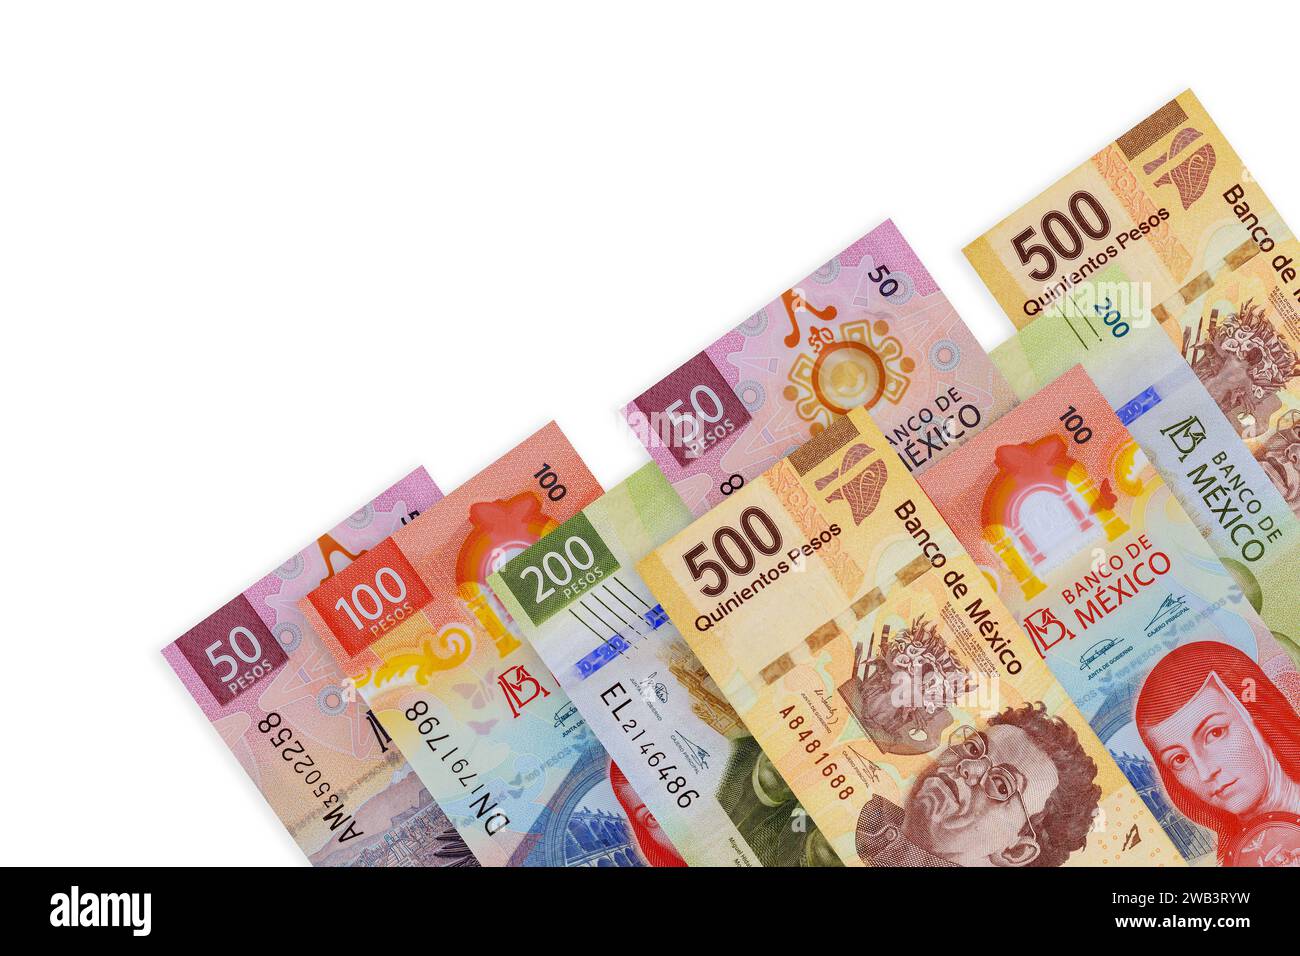 Mexican currency denominations banknotes, such as 500, 200, 100, 50, 20 peso bills national cash Stock Photo